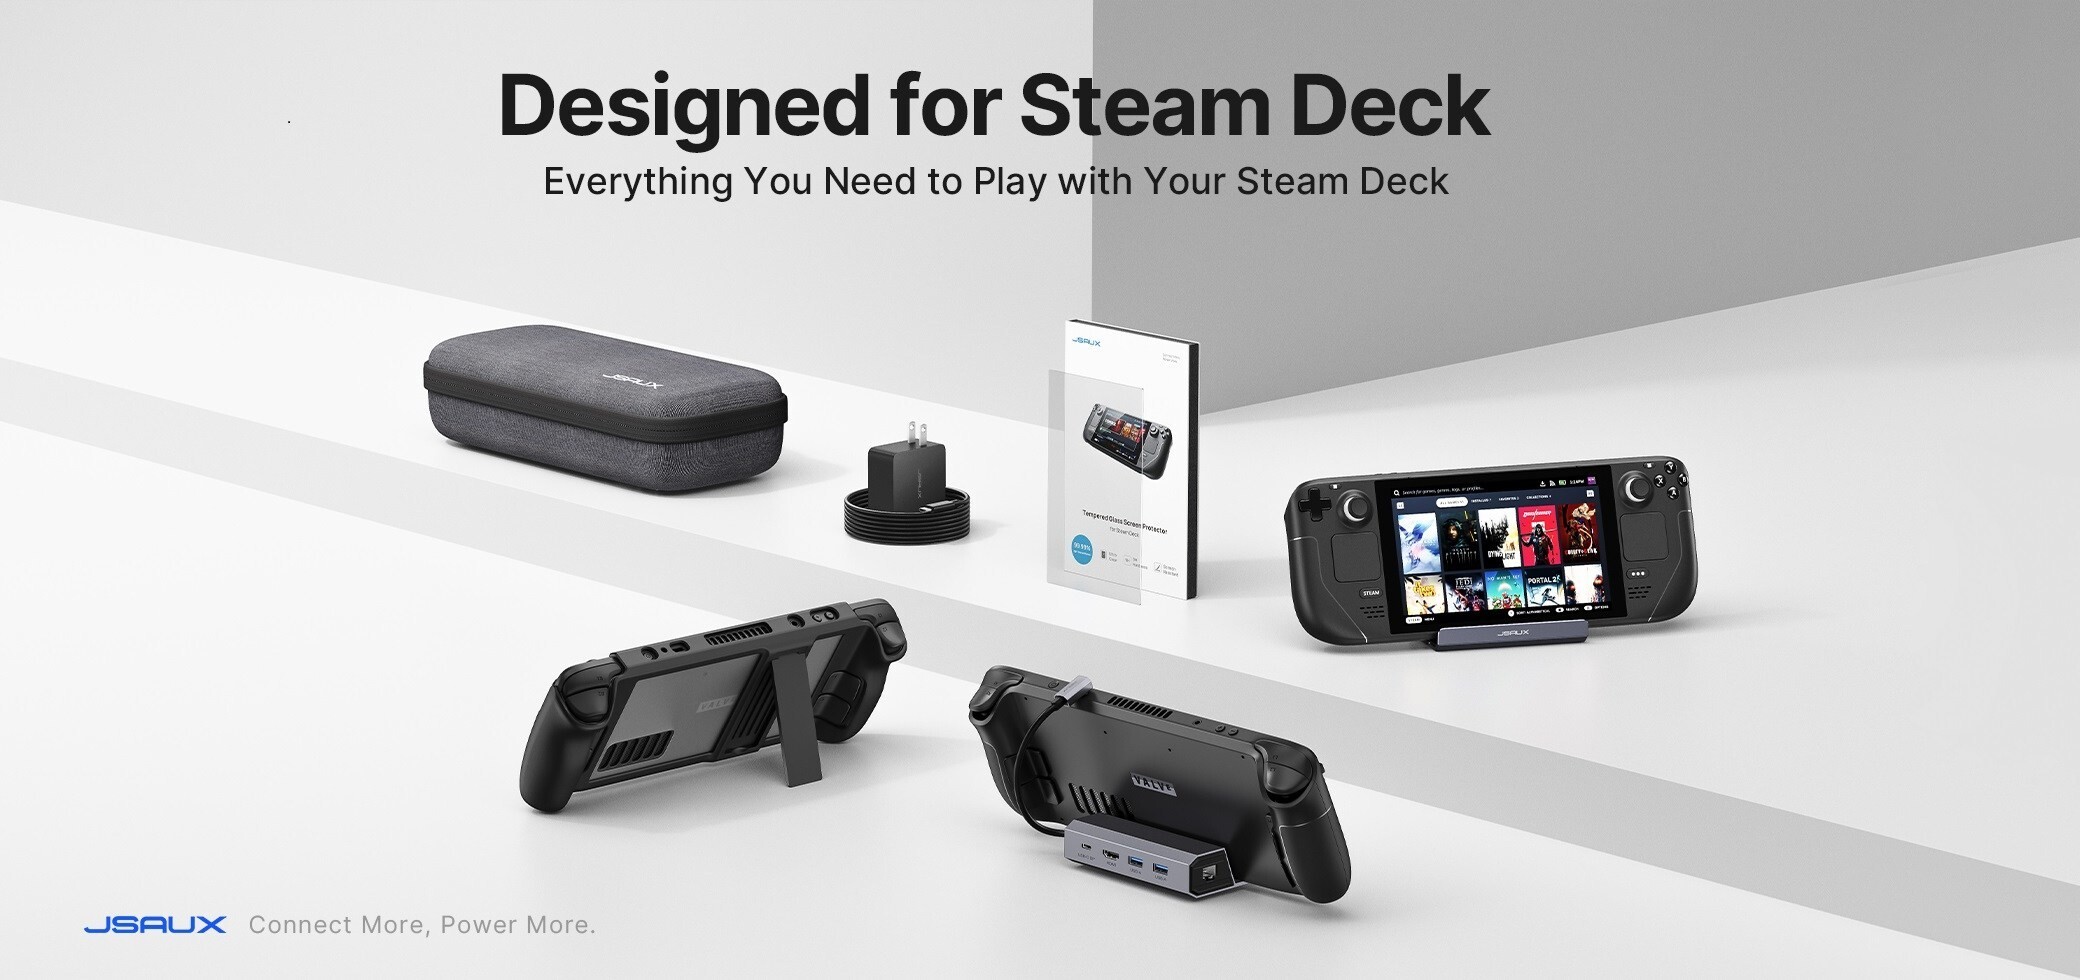 Steam Deck 2 Release Date Confirms 2025 or Later Launch 